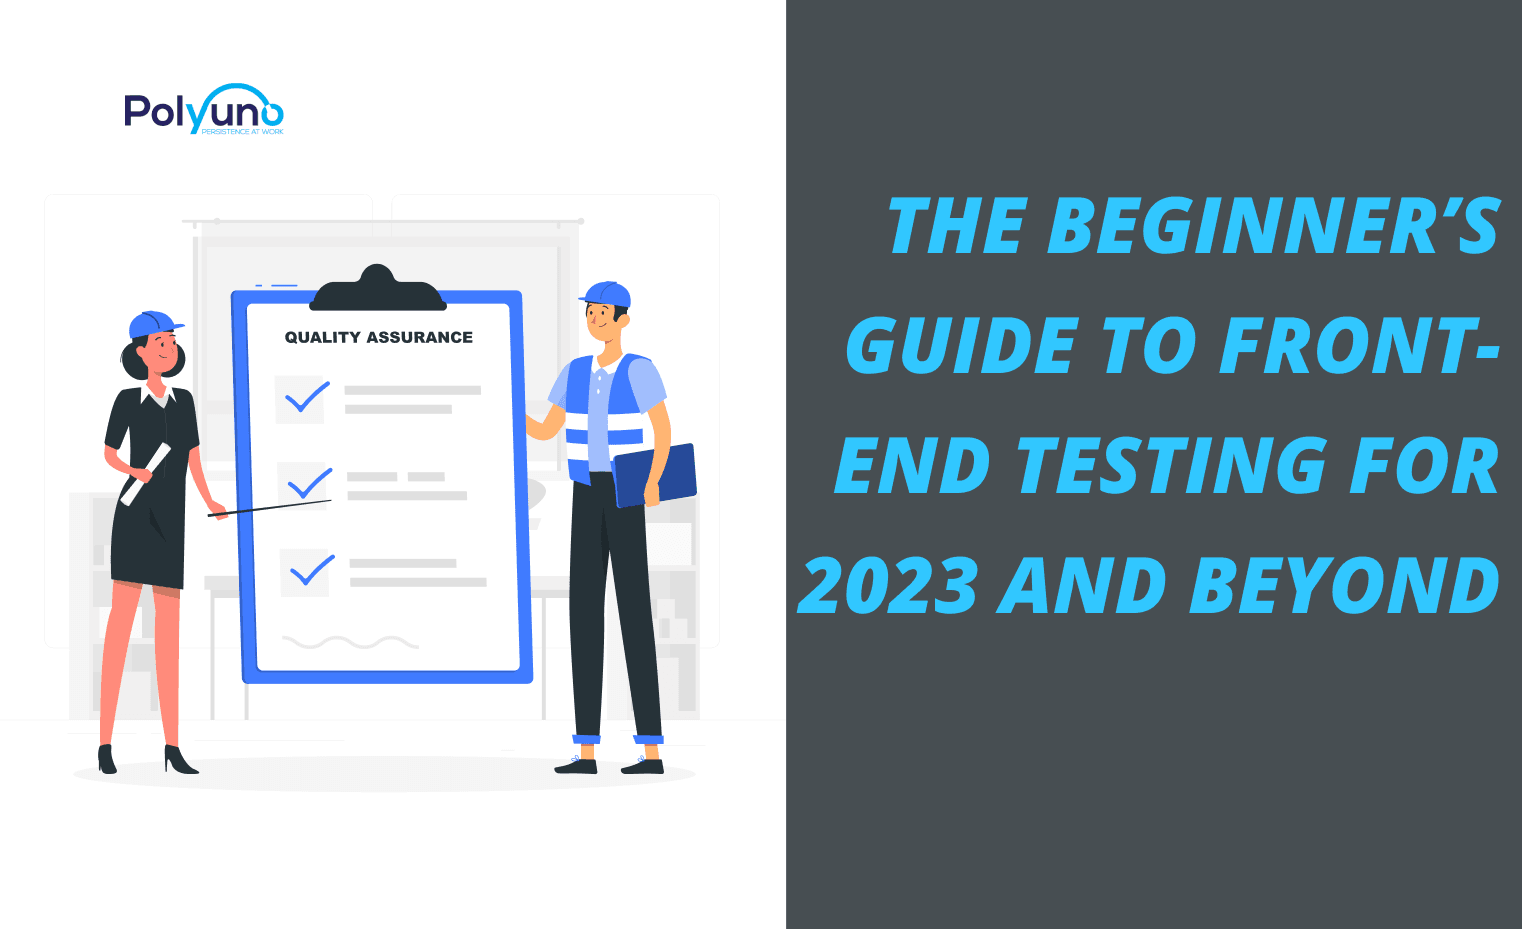 The Beginner’s Guide to Front-end Testing for 2023 and Beyond cover